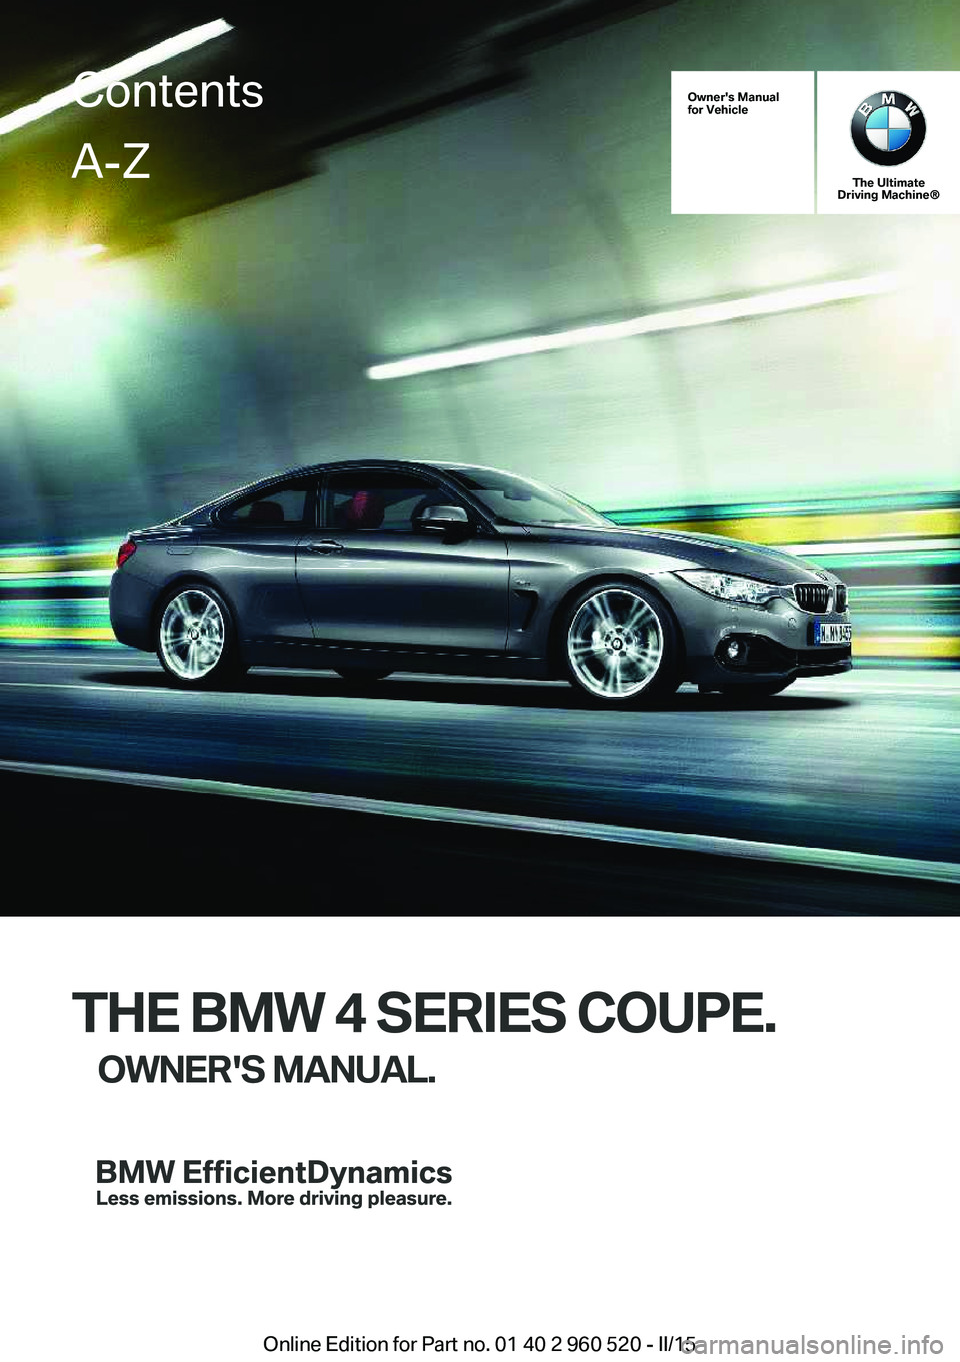 BMW 435I COUPE 2015  Owners Manual Owner's Manual
for Vehicle
The Ultimate
Driving Machine®
THE BMW 4 SERIES COUPE.
OWNER'S MANUAL.
ContentsA-Z
Online Edition for Part no. 01 40 2 960 520 - II/15   